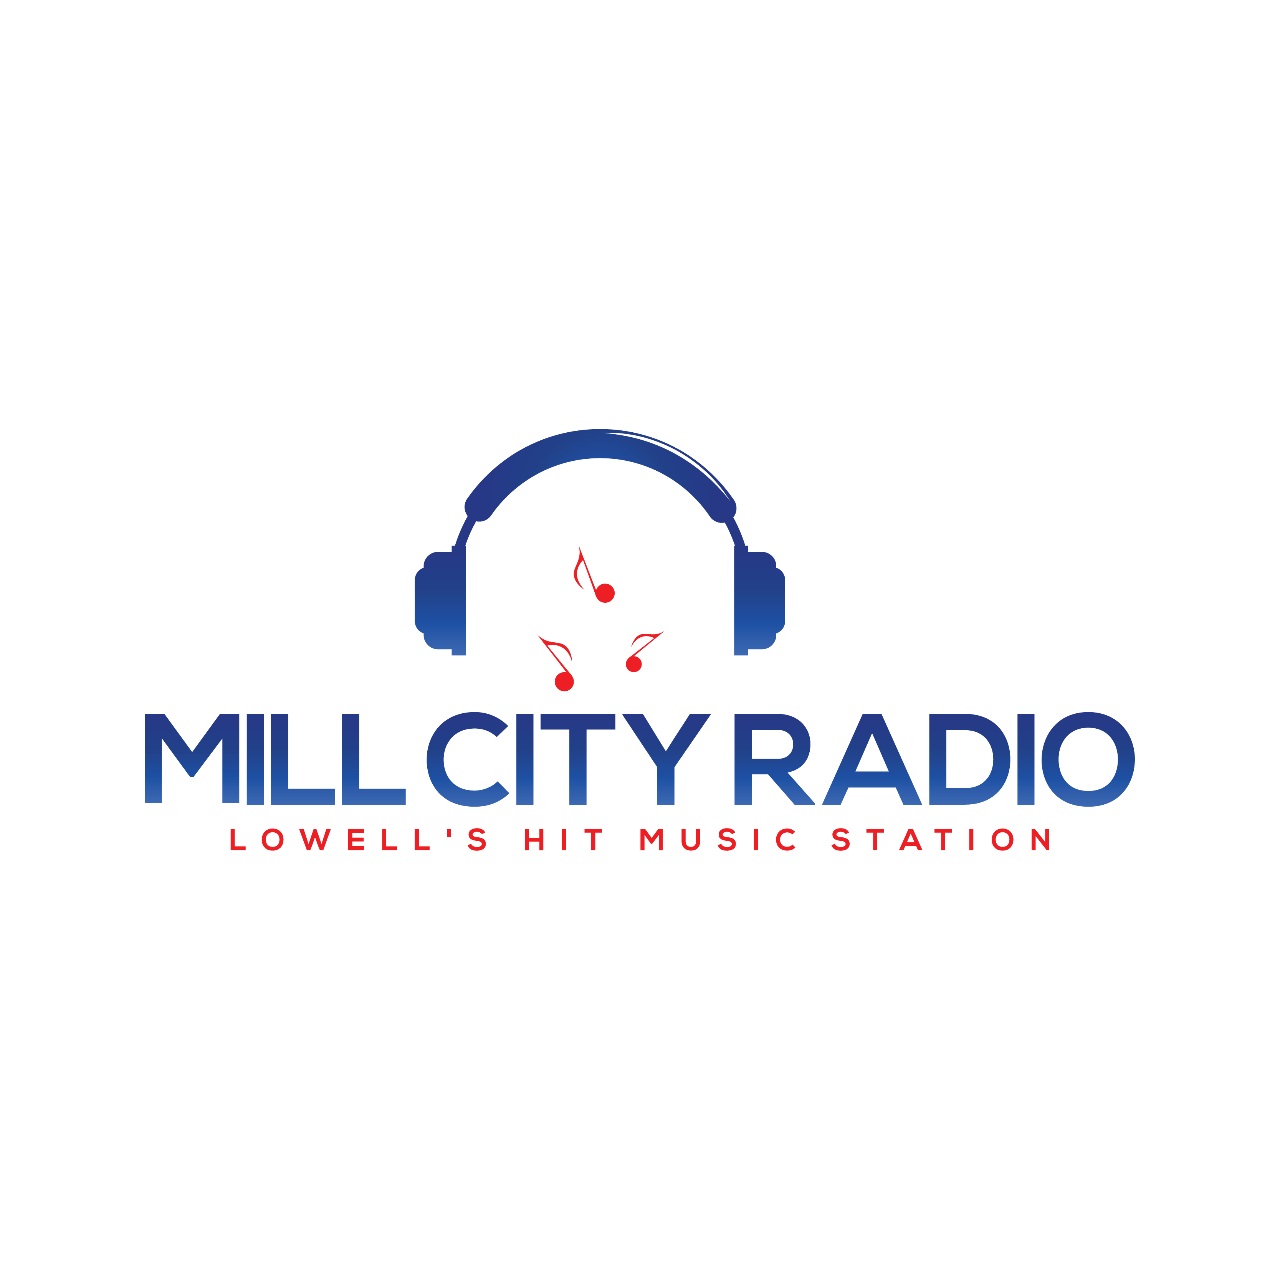 Art for Lowell's Hit Music Station by Mill City Radio